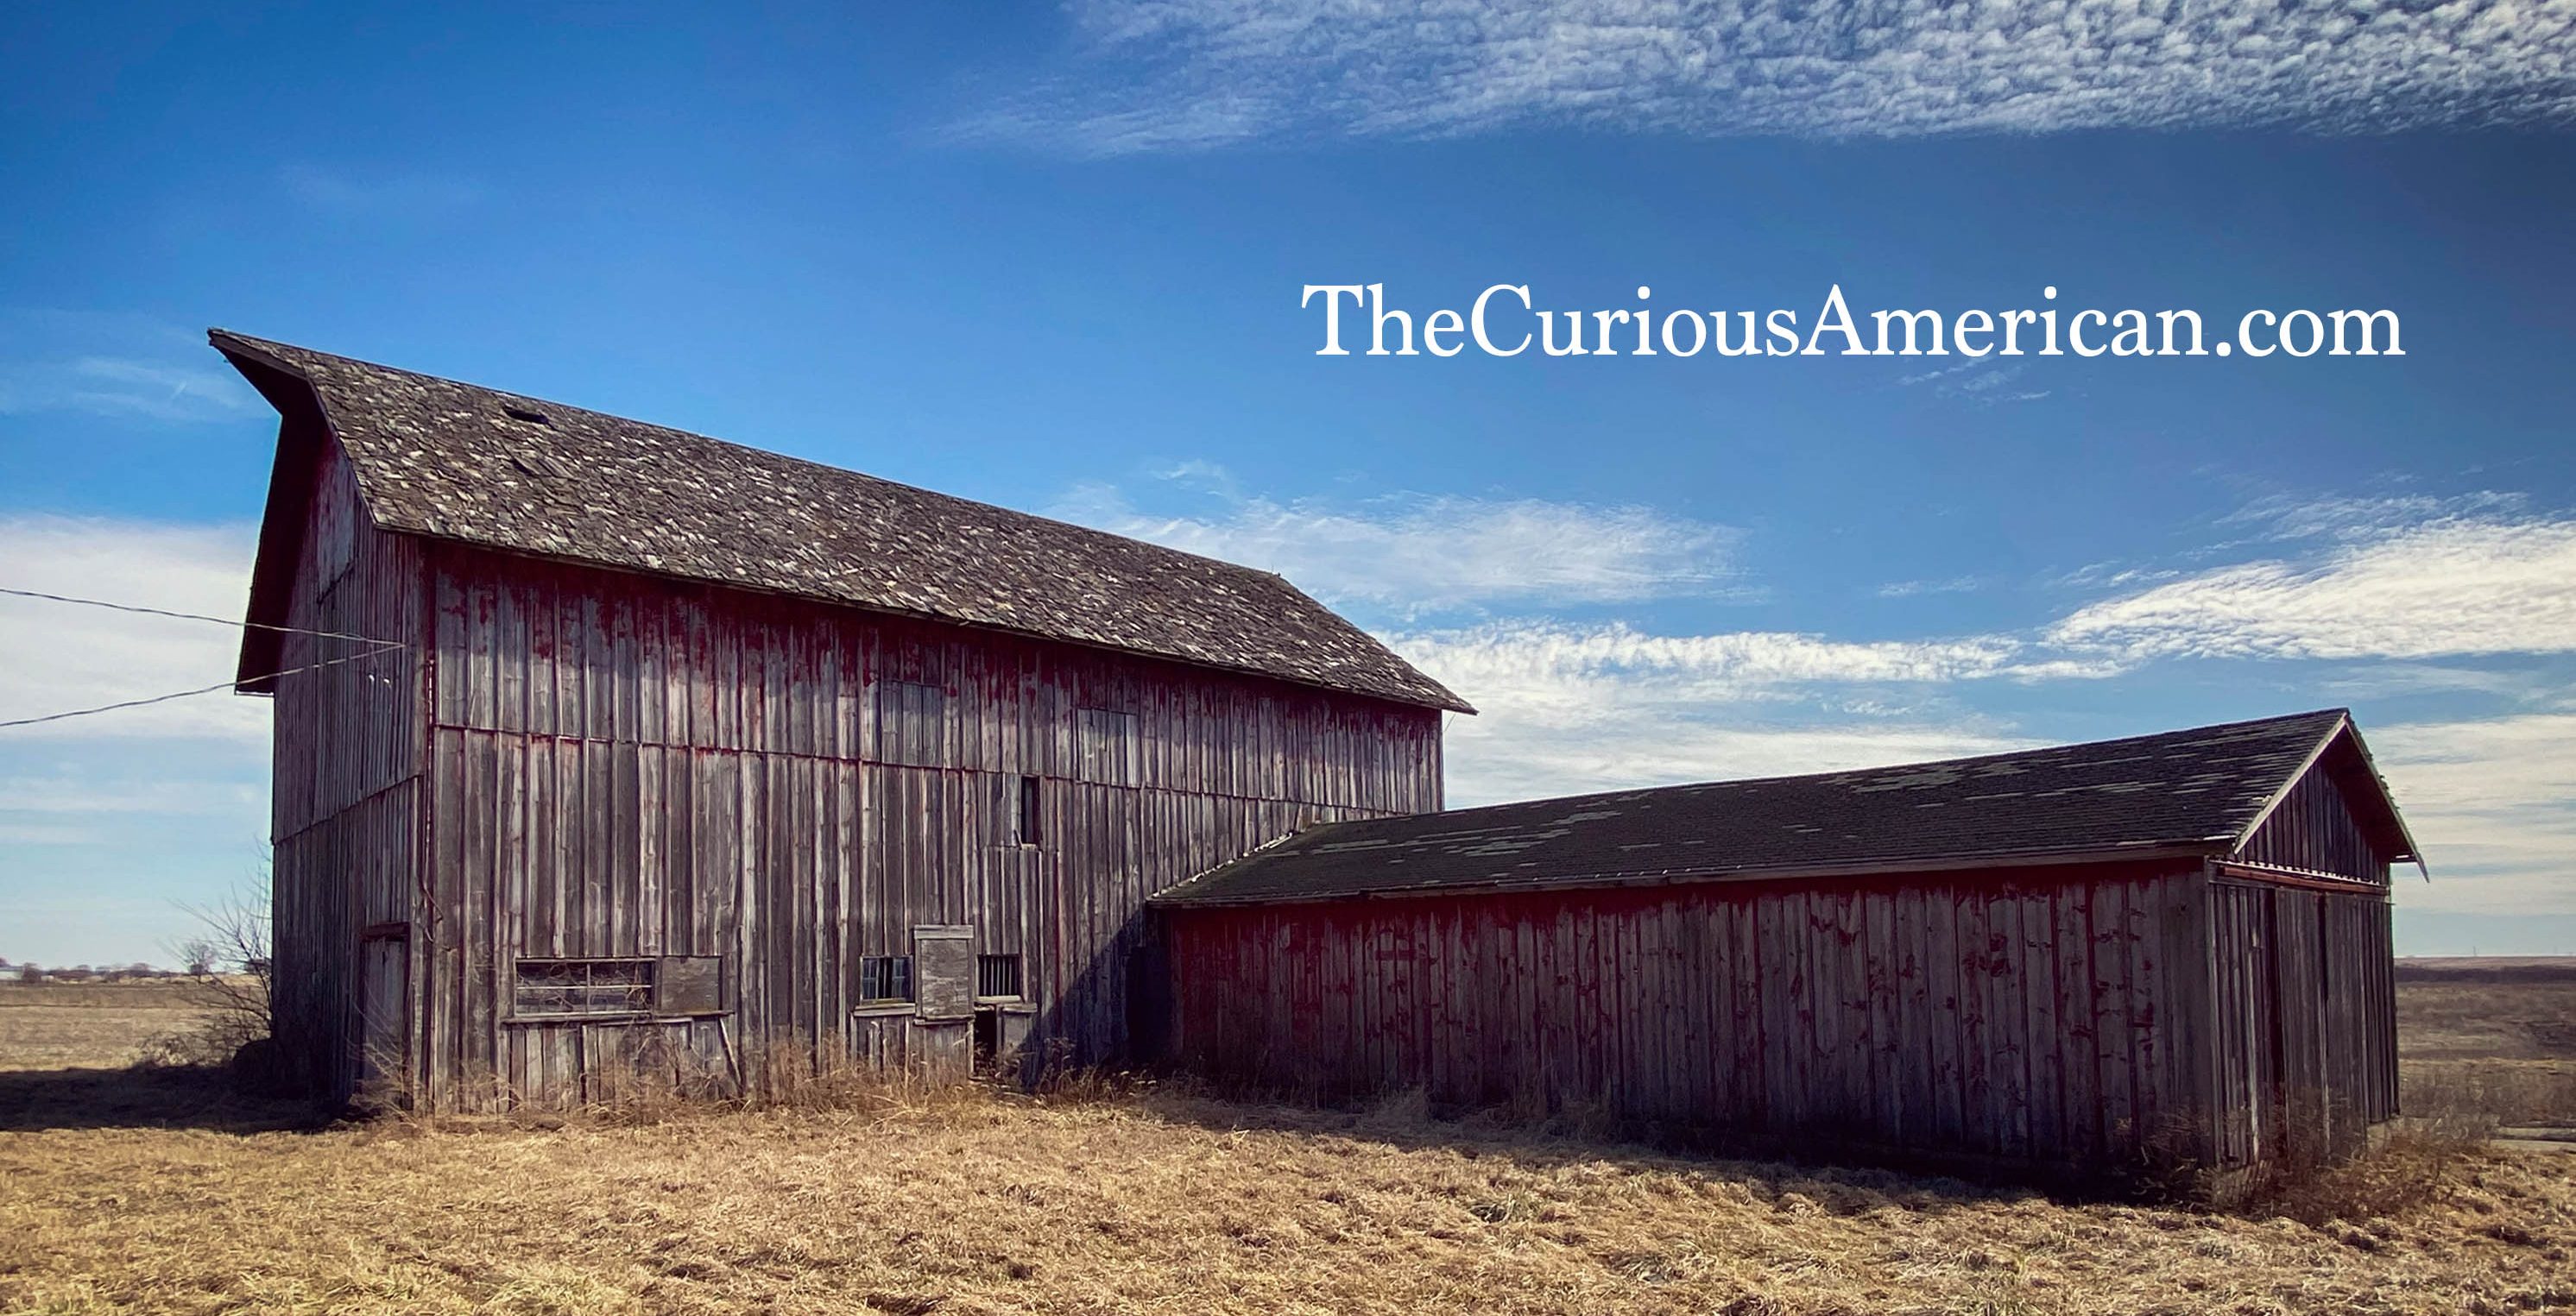 Welcome to The Curious American